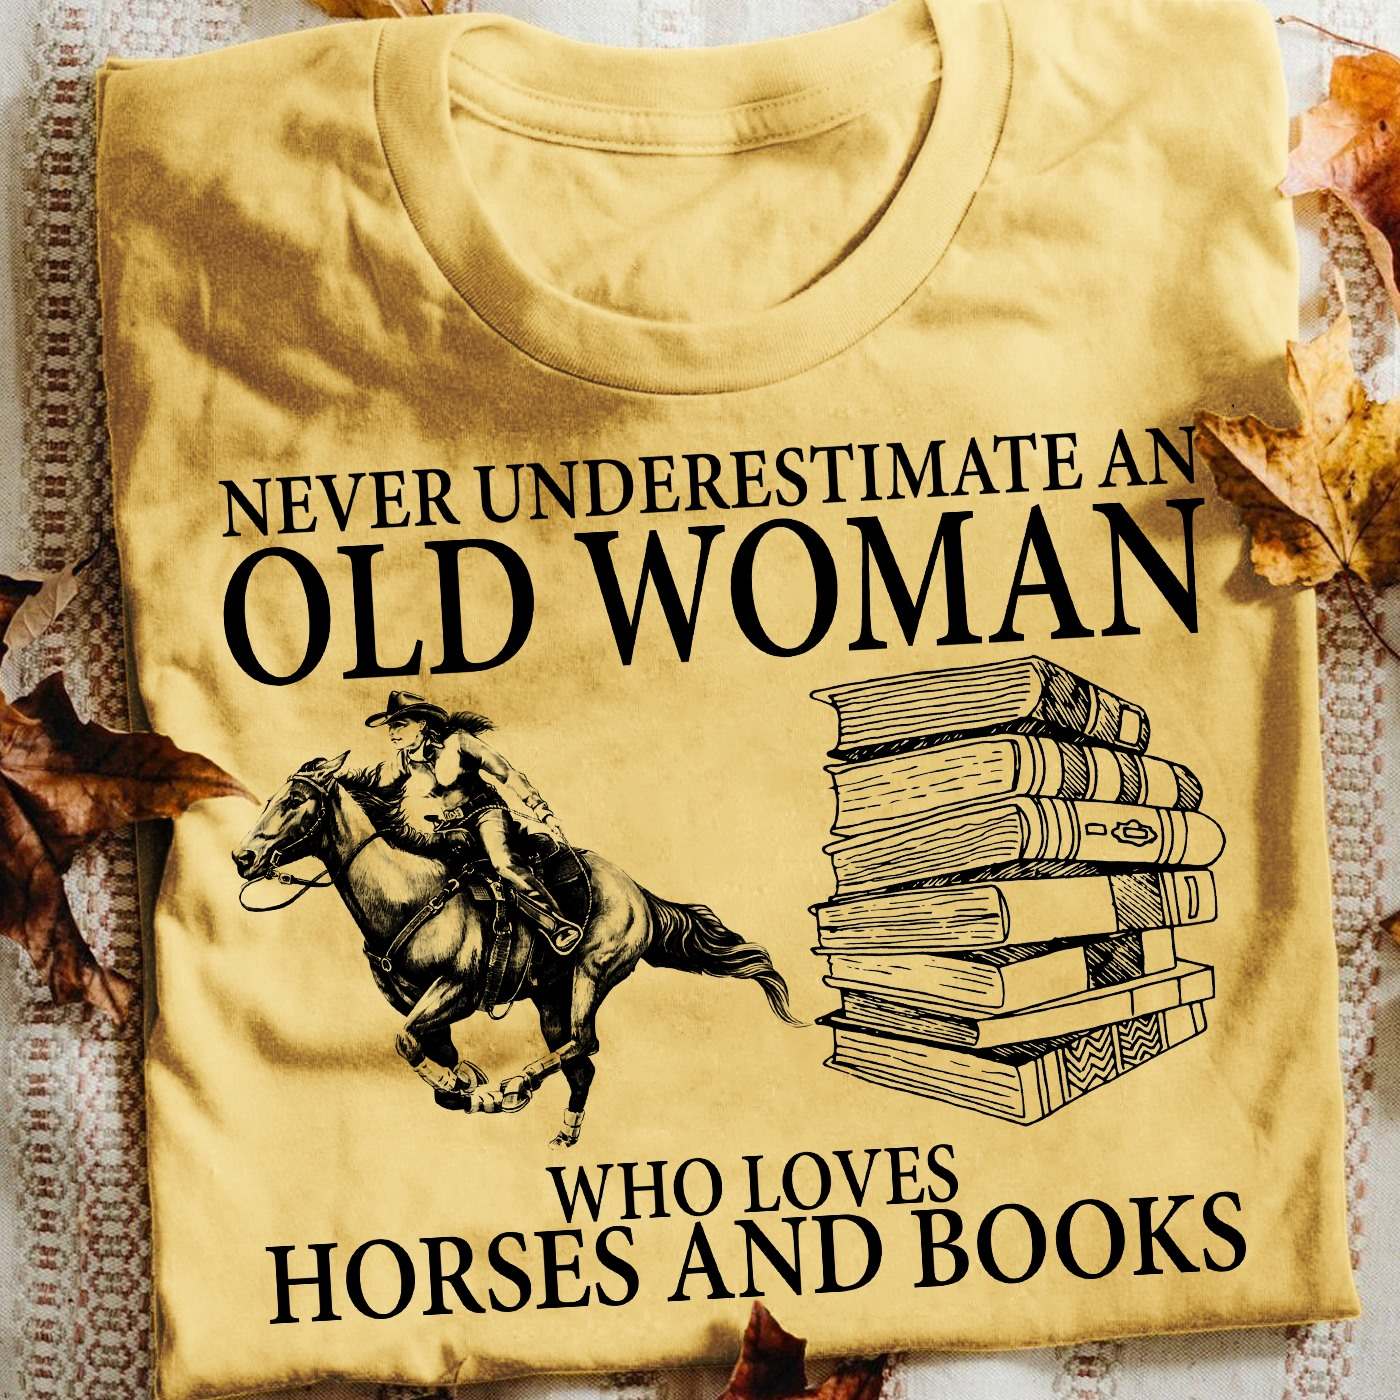 Never underestimate an old woman who loves horses and books